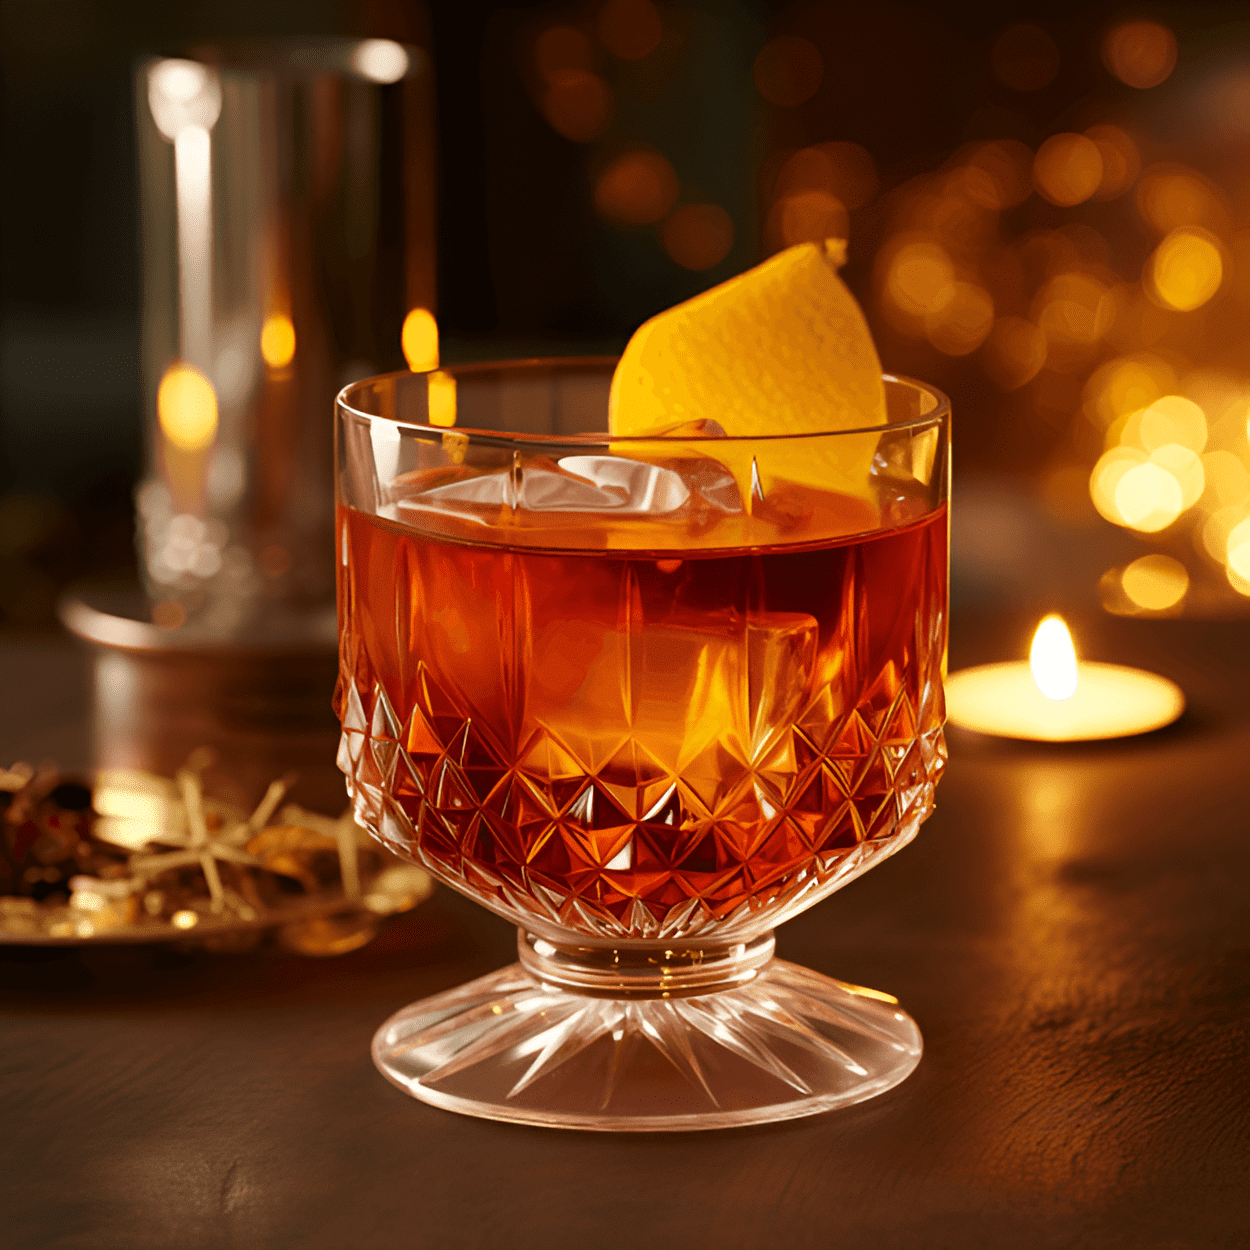 Boulevardier Cocktail Recipe - The Boulevardier is a complex and well-balanced cocktail, with a rich and bold taste. It has a bitter-sweet profile, with the bitterness of Campari complementing the sweetness of the vermouth. The whiskey adds warmth and depth, making it a perfect drink for sipping.